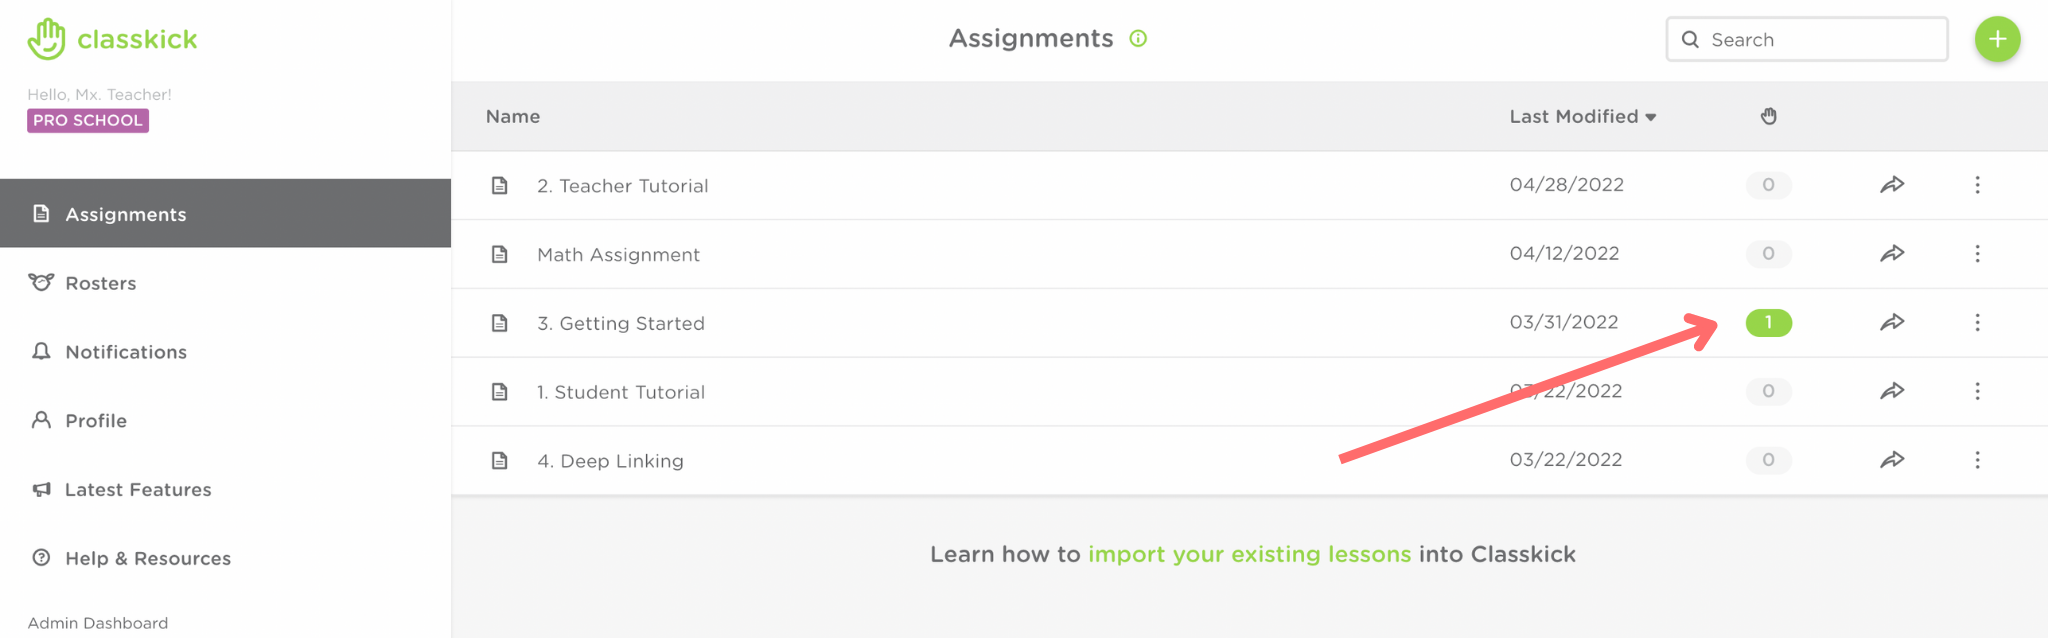 The teacher assignments dashboard. A red arrow points to a green number one notification next to an assignment.